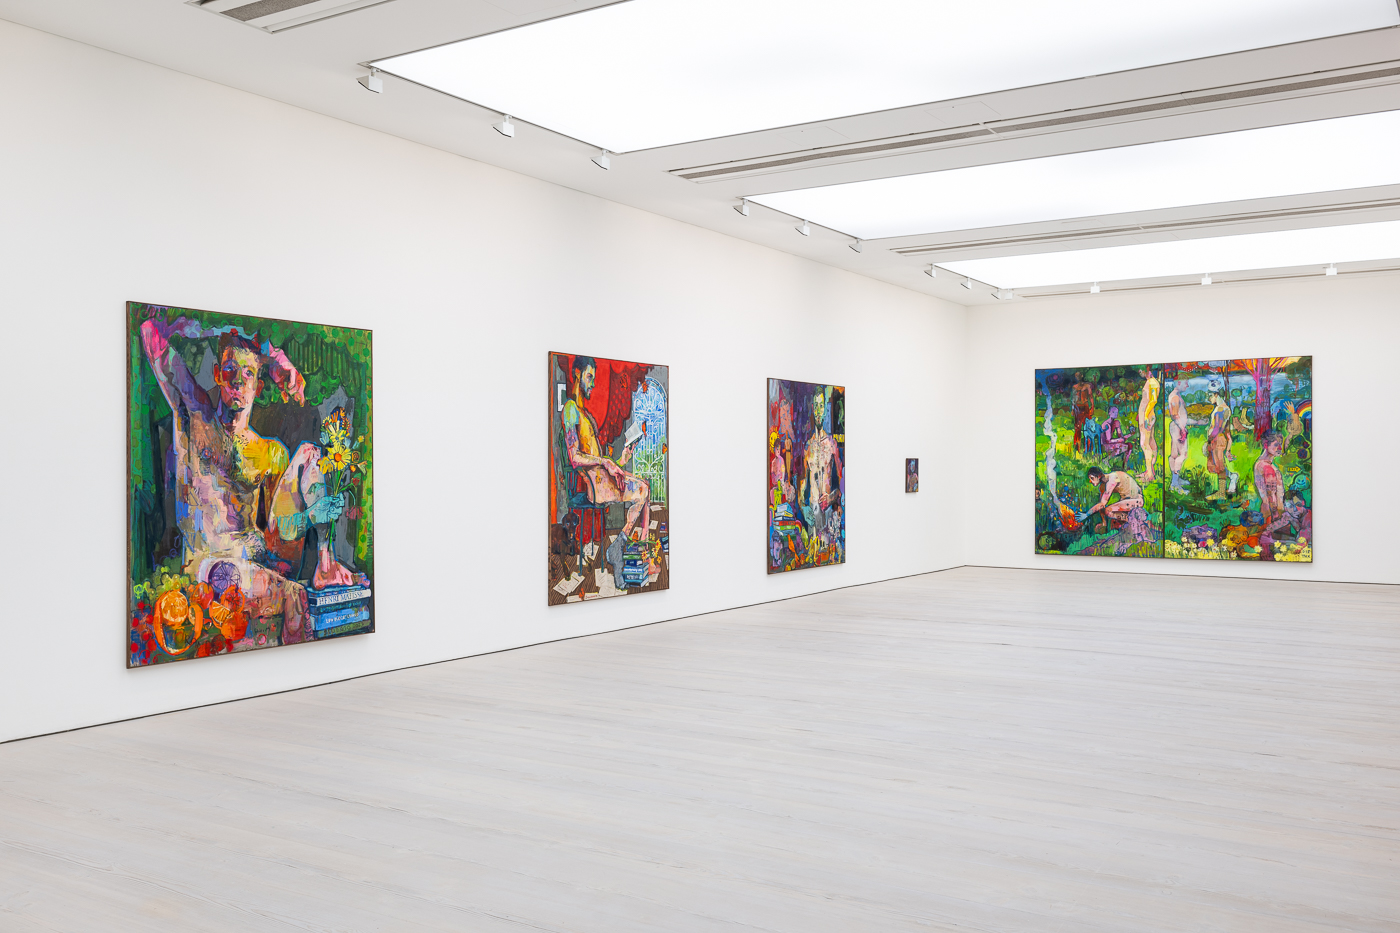 Installation image for Andrew Salgado: Tomorrow I'll Be Perfect, at BEERS London